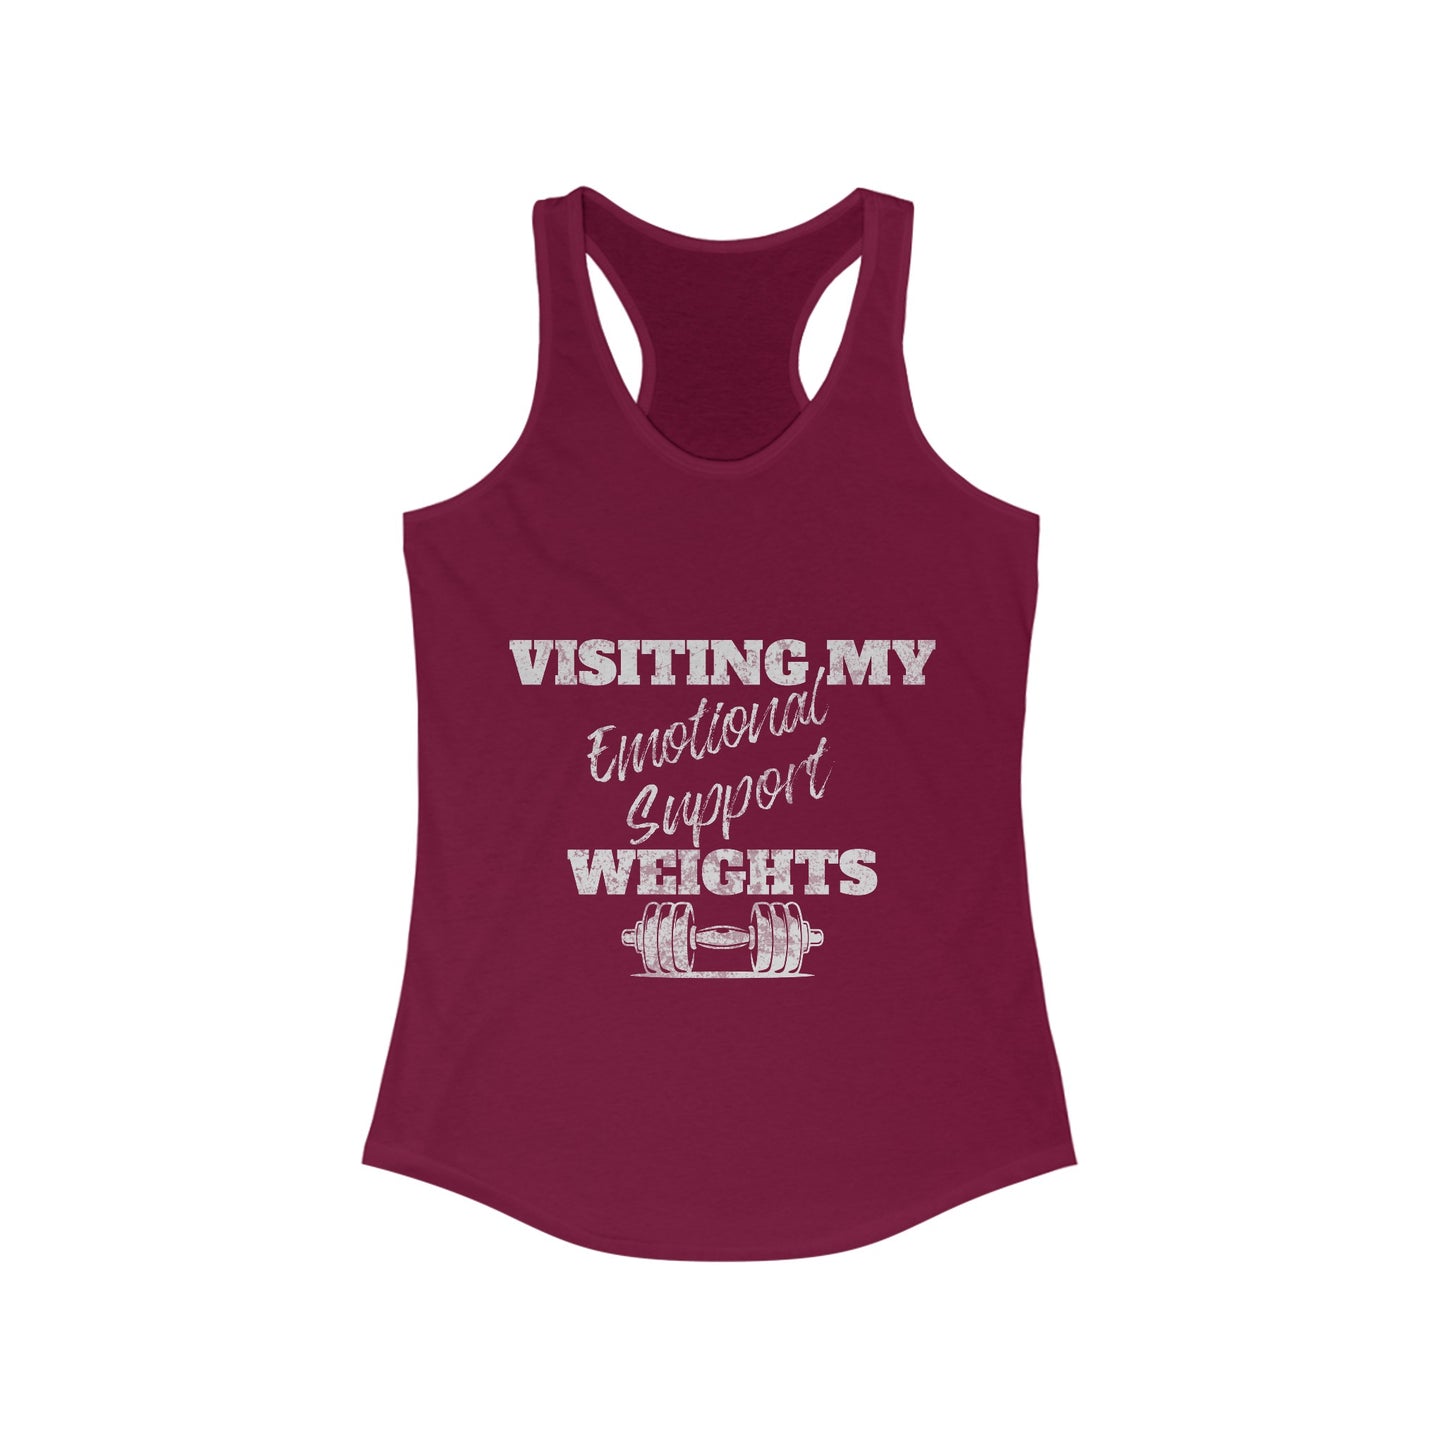 Emotional Support Weights Women's Ideal Racerback Tank